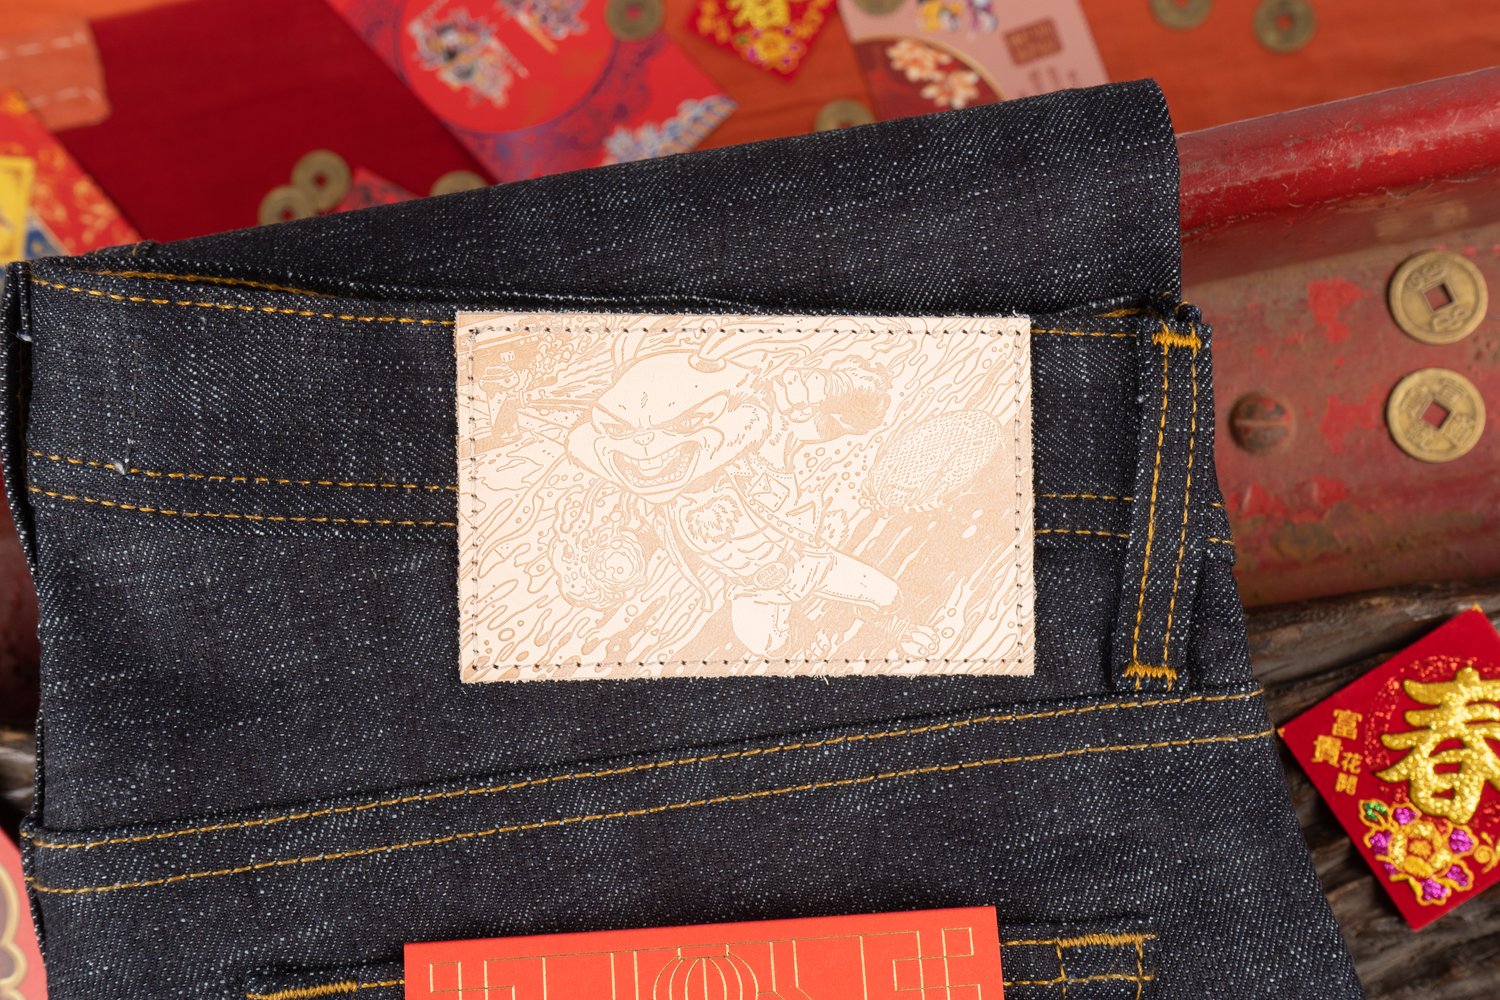 Chinese New Year - Water Rabbit Selvedge - Leather Patch